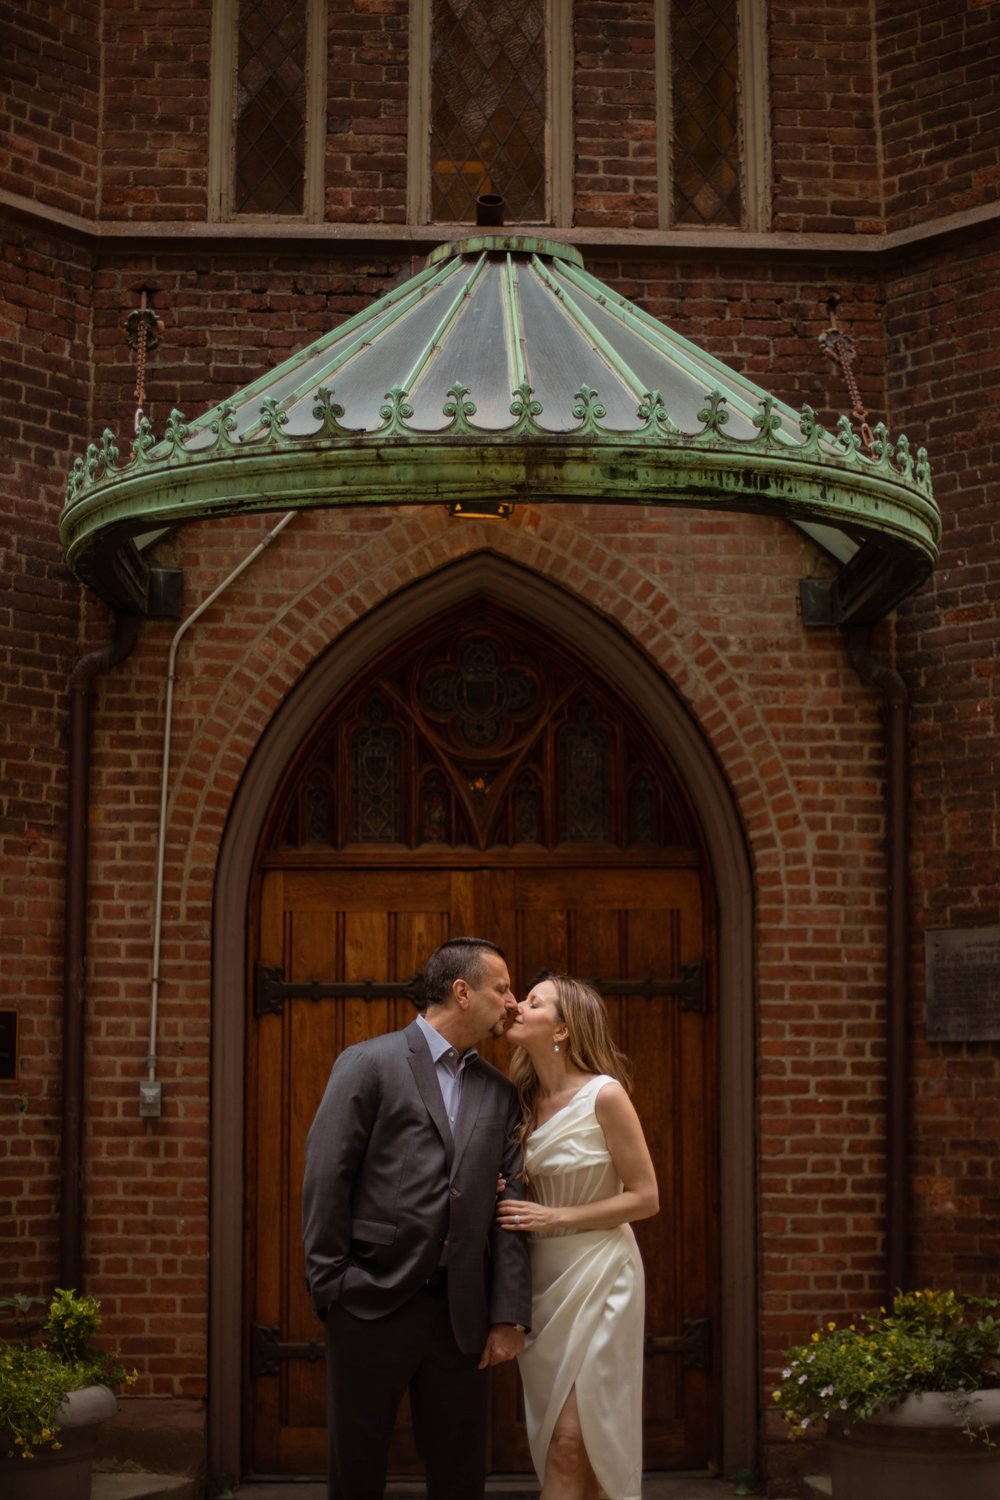 Adding a touch of history to their love story at this Underground Railroad stop. 🚂 #NYCWeddingHistory #LoveStory